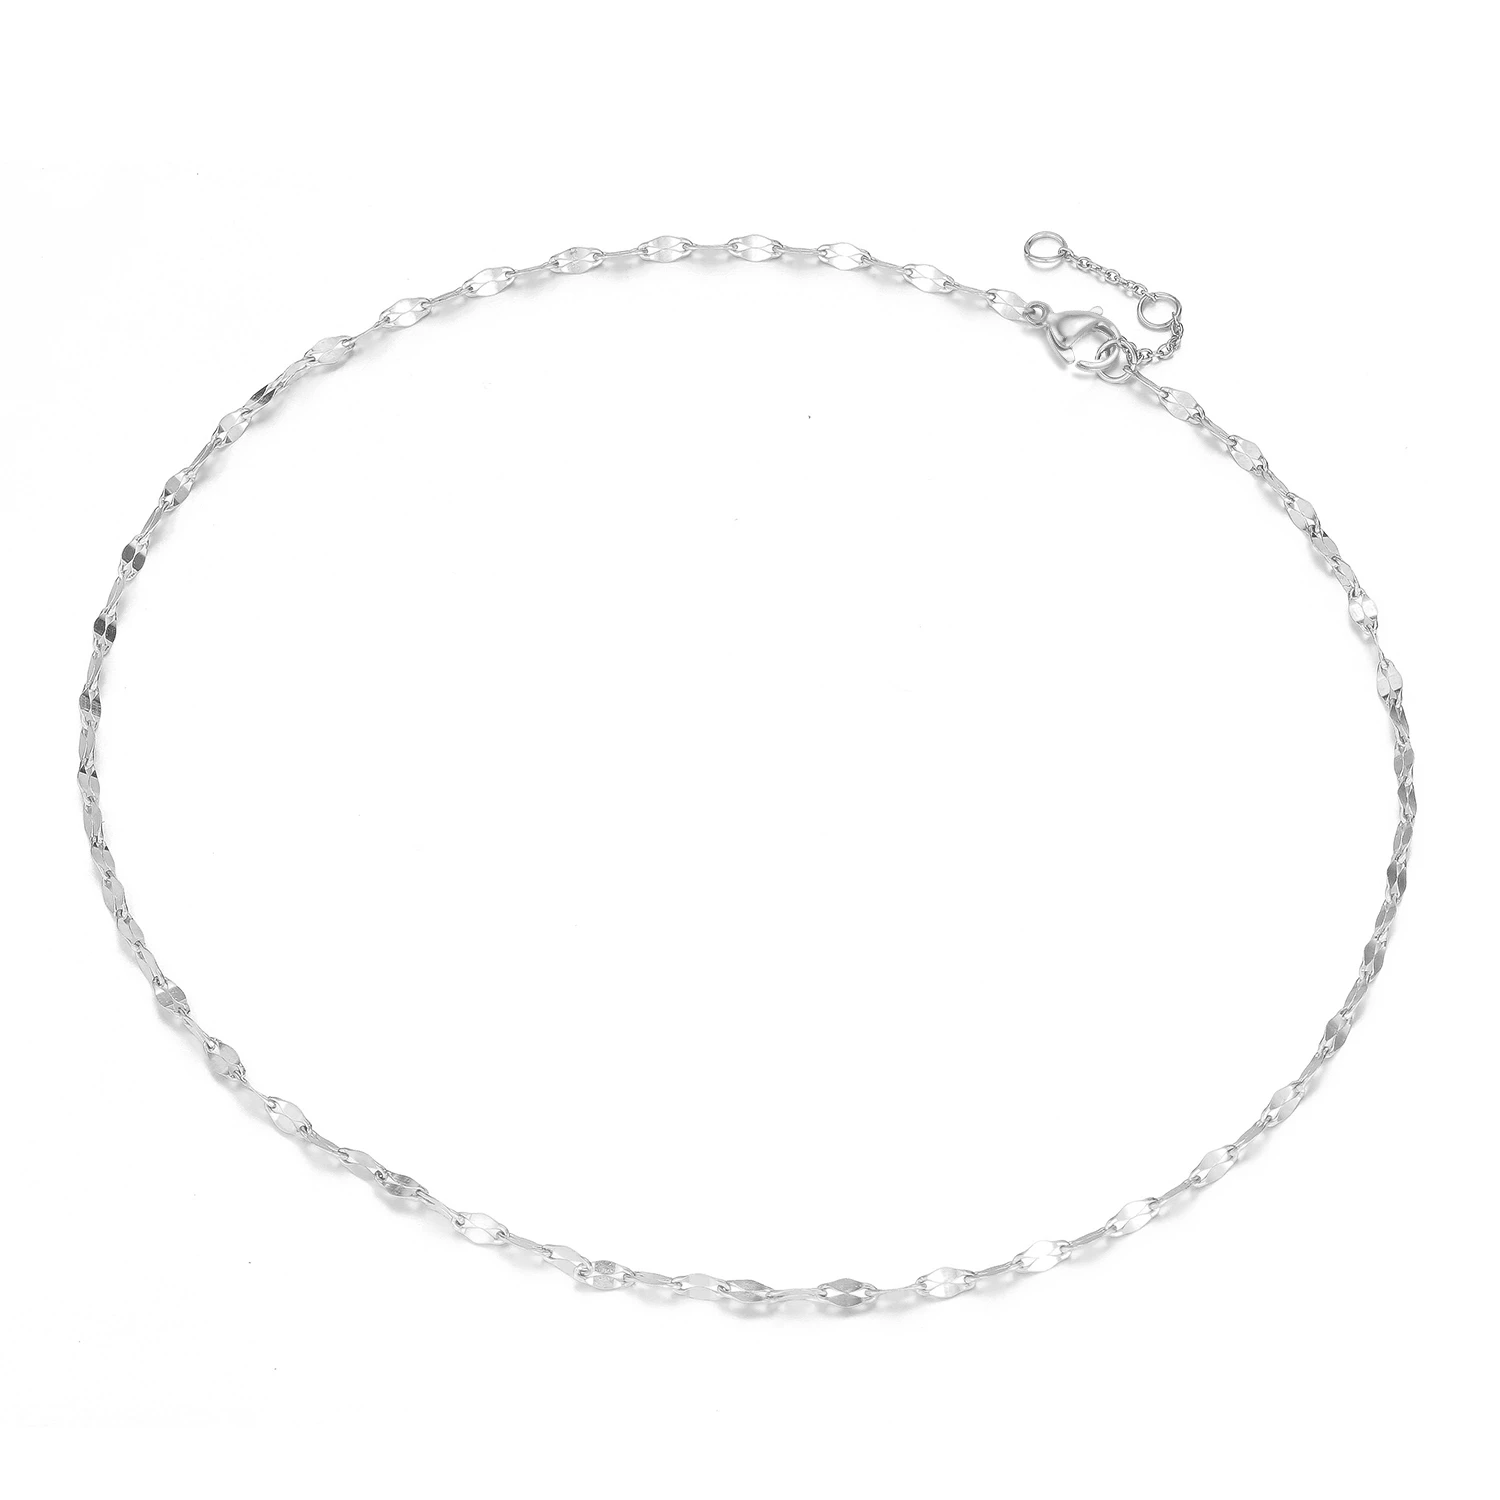 Hellolook Personalized and creative stainless steel accessory necklace